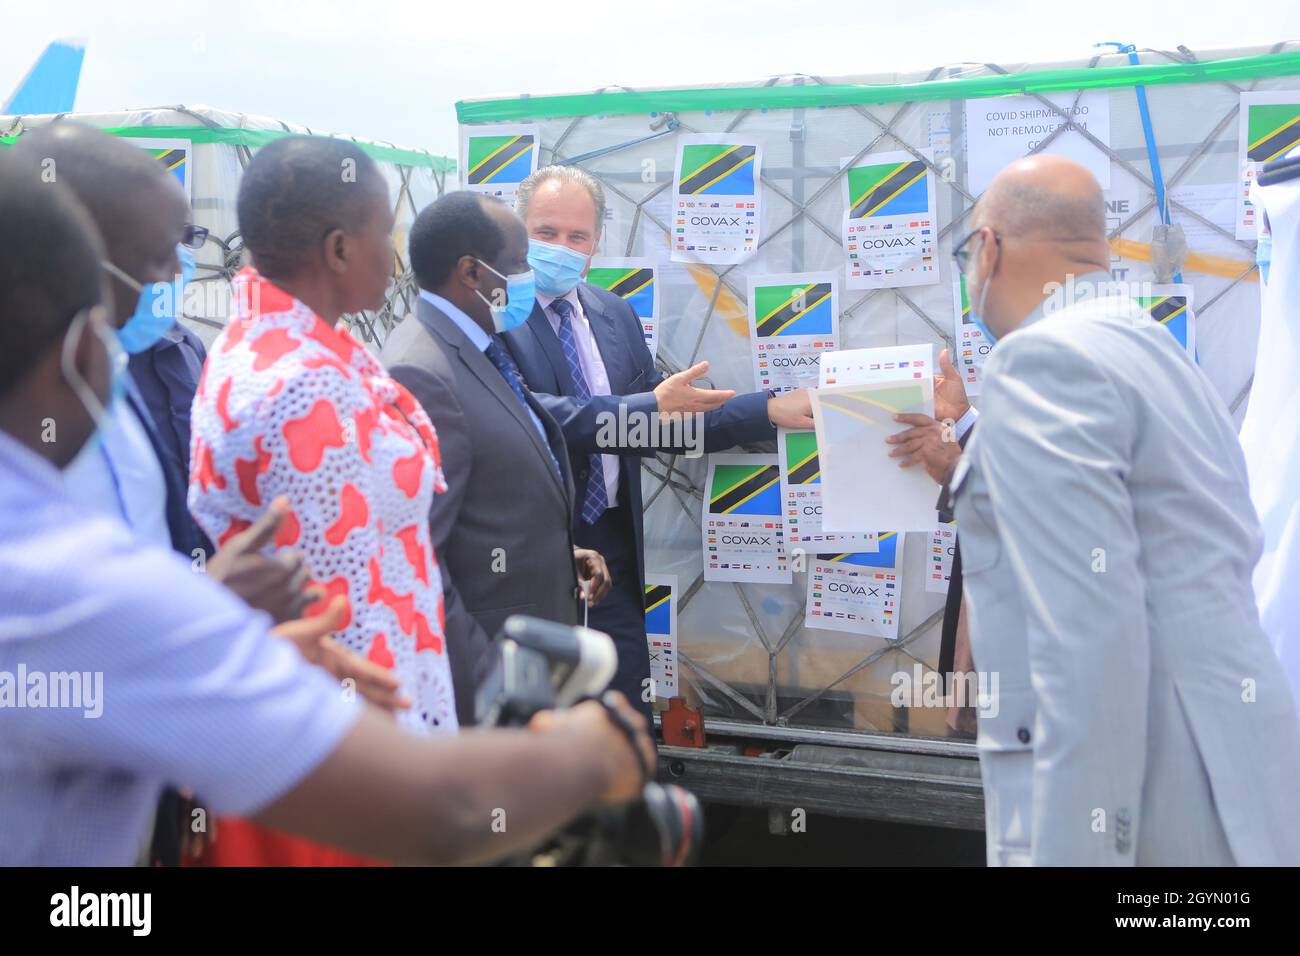 Dar Es Salaam, Tanzania. 8th Oct, 2021. Tanzanian officials check a batch of the Sinopharm vaccine from China at Julius Nyerere International Airport in Dar es Salaam, Tanzania, on Oct. 8, 2021. Tanzania on Friday received 1,065,600 doses of the Sinopharm vaccine from China under COVAX, boosting the east African nation's vaccination campaign against COVID-19. COVAX is a global program aimed at providing equitable access to COVID-19 vaccines. Credit: Herman Emmanuel/Xinhua/Alamy Live News Stock Photo